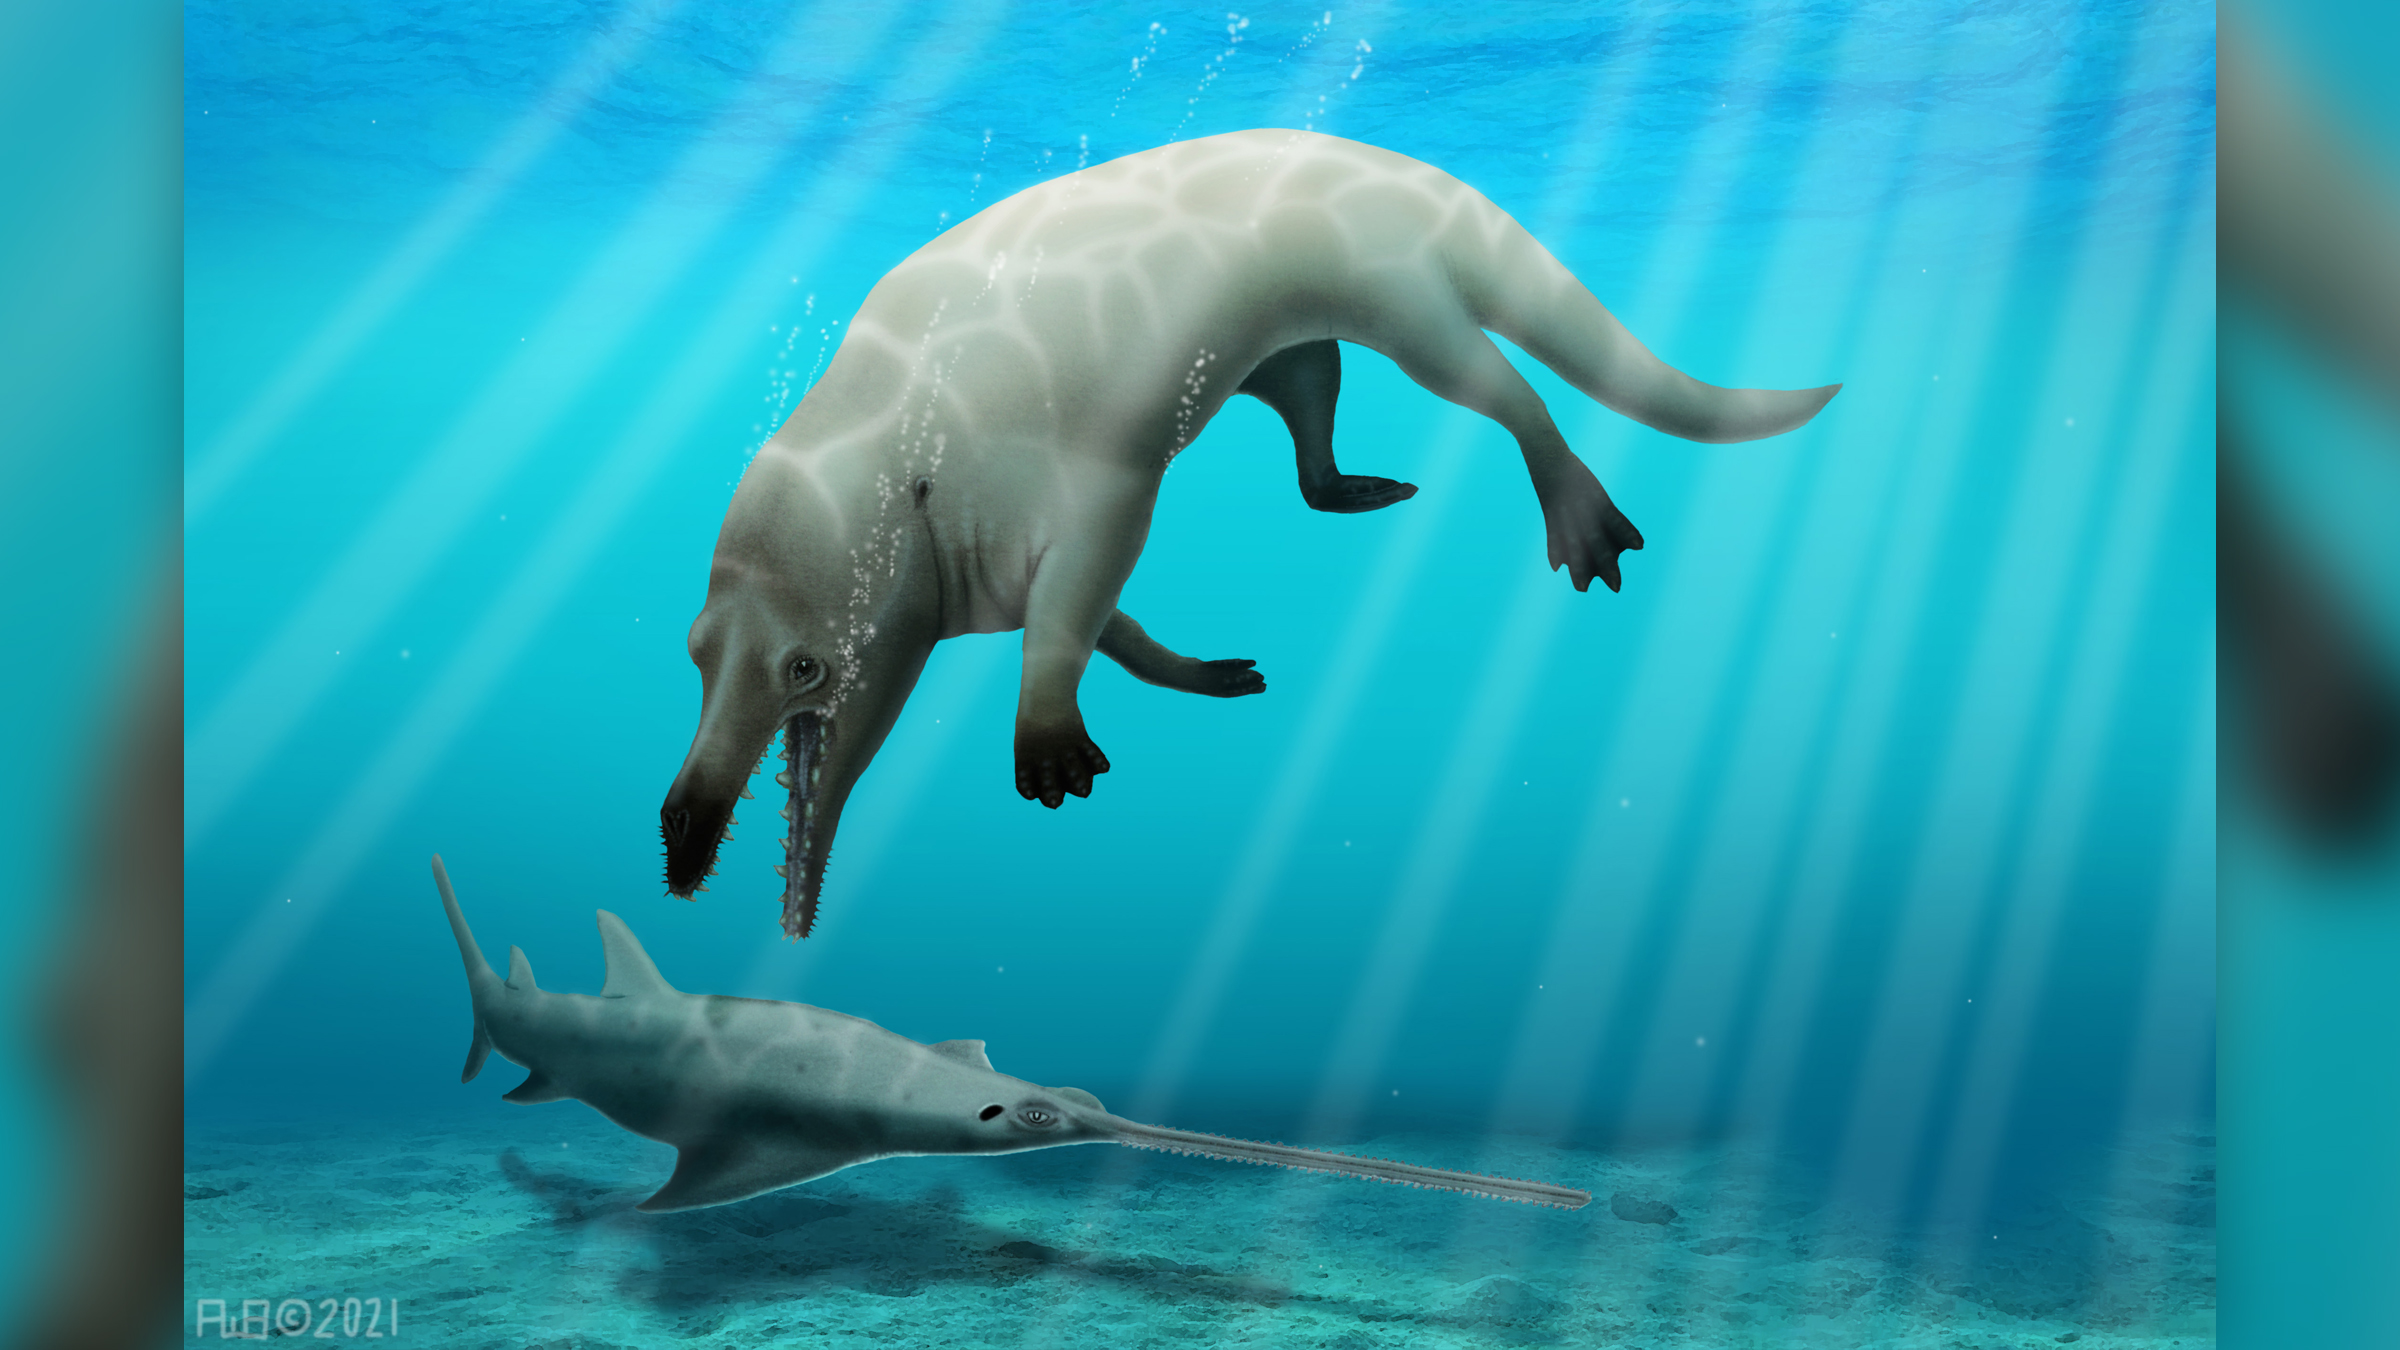 The semiaquatic whale walked on land and swam in water.